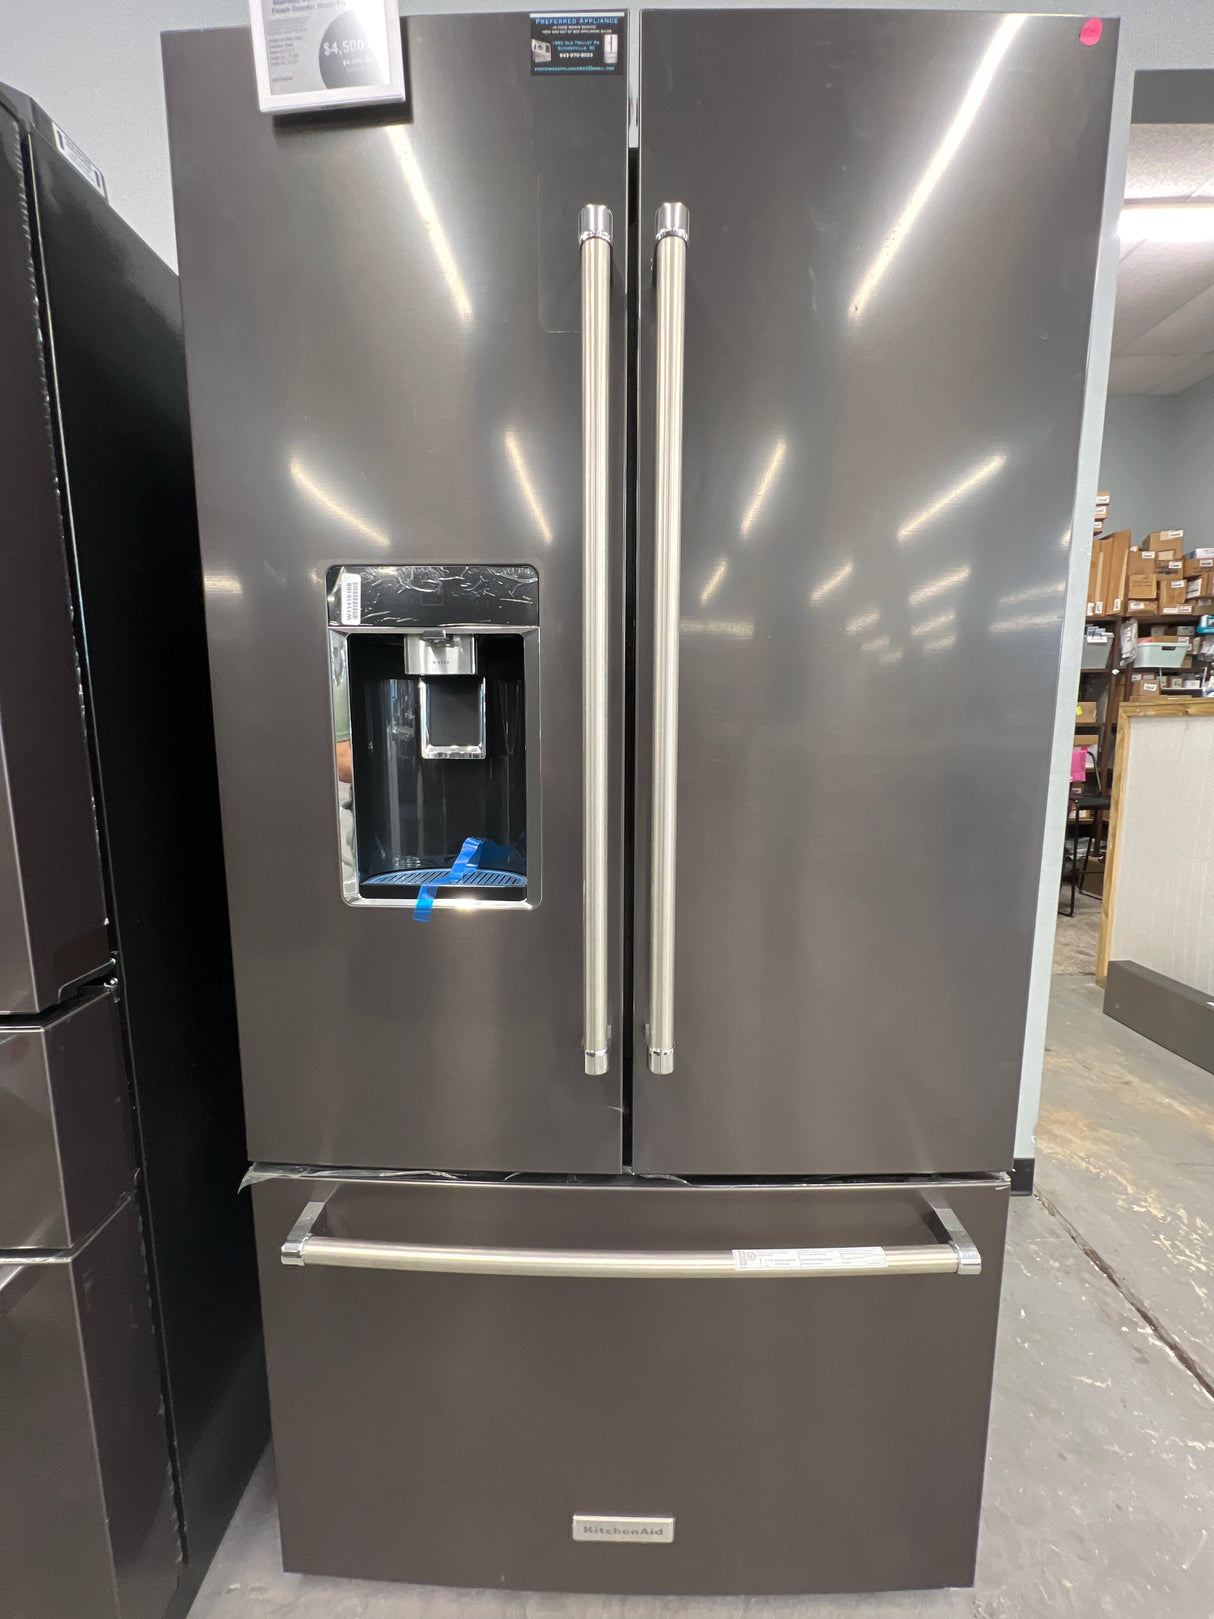 KRFC704FBS kitchenAid 23.8 ft.³ black stainless steel with print shield finish countertop to French door refrigerator.